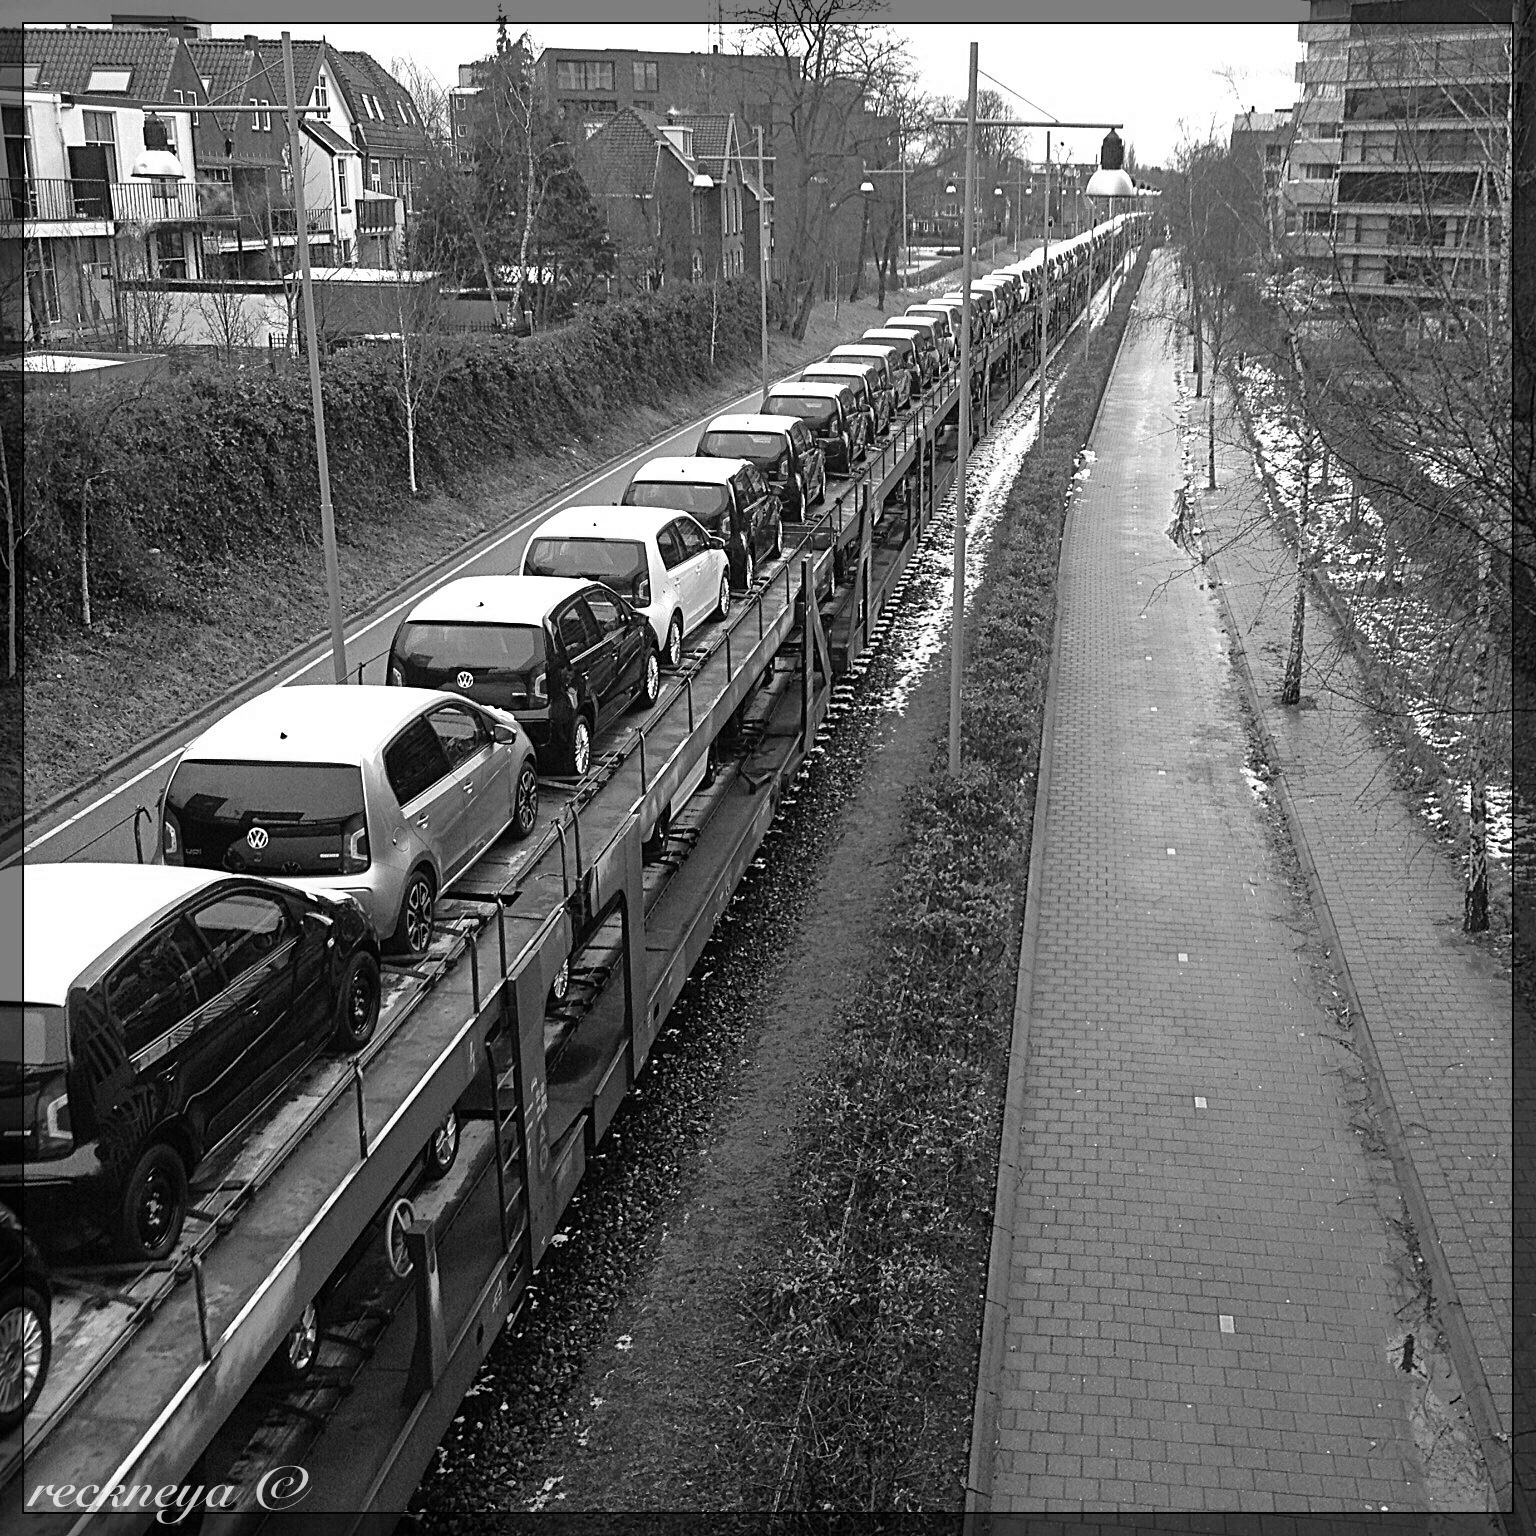 This photo was taken from a bridge near the train station of Amersfoort. This train is going to the PON dealership on the other end of the track, several kilometres away, in Leusden. The train track is perhaps the oldest in Amersfoort. It is a single track, with no electricity cables running above it. The locomotive pulling these wagons is a strong diesel. Except for the weekends a train like this, easily hundreds of meters long, goes to the dealership and returns that same day empty.